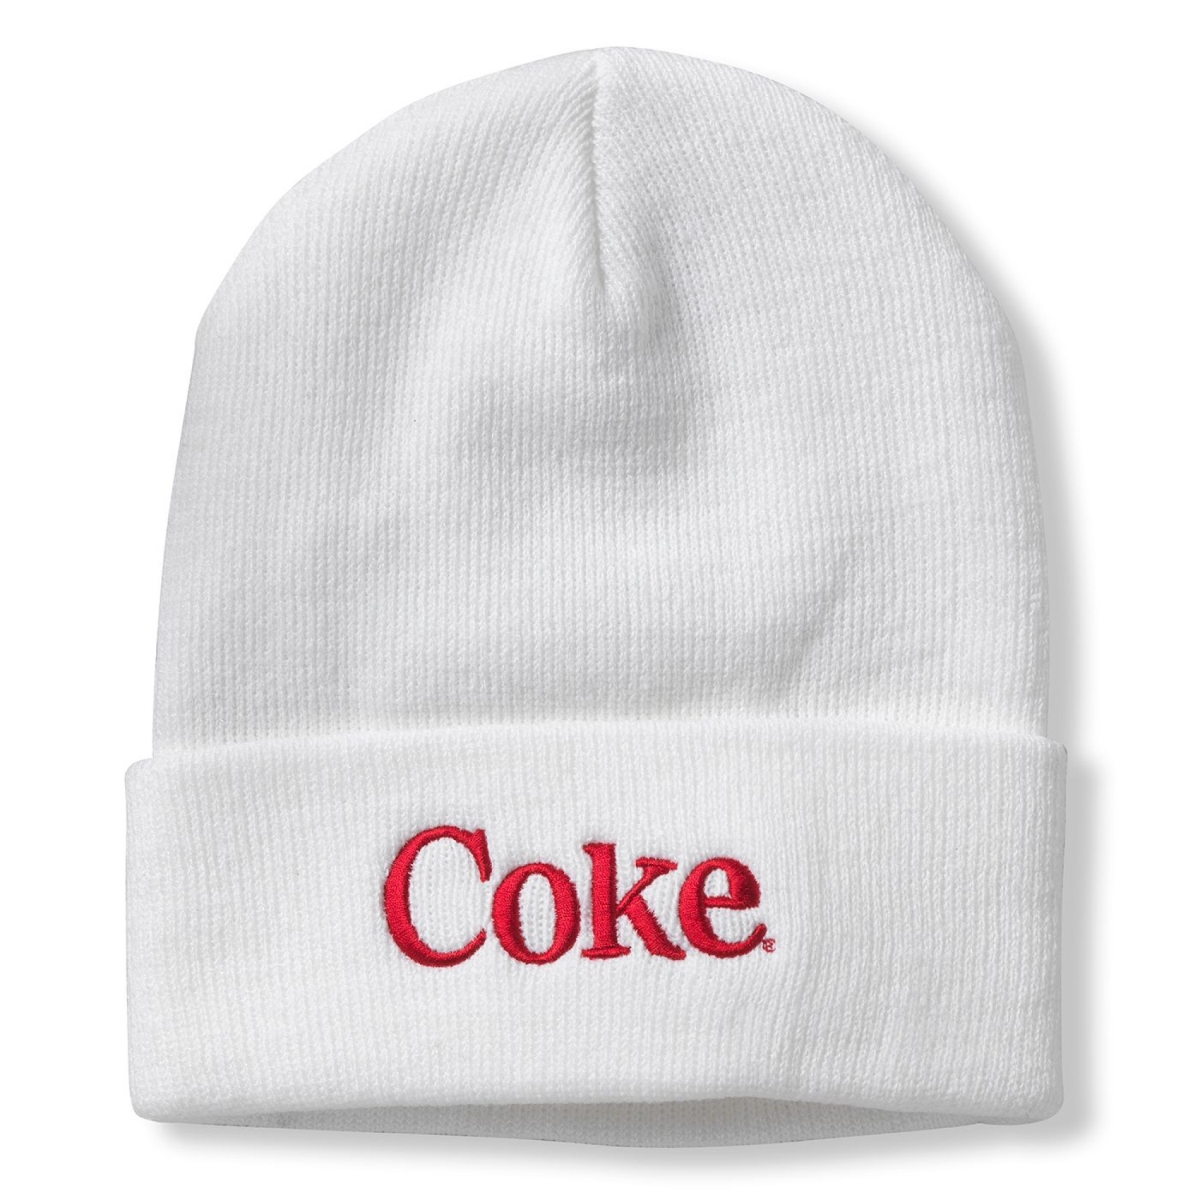 Picture of Coca-Cola 834847 Coke Embroidered Logo Cuffed Knit Beanie